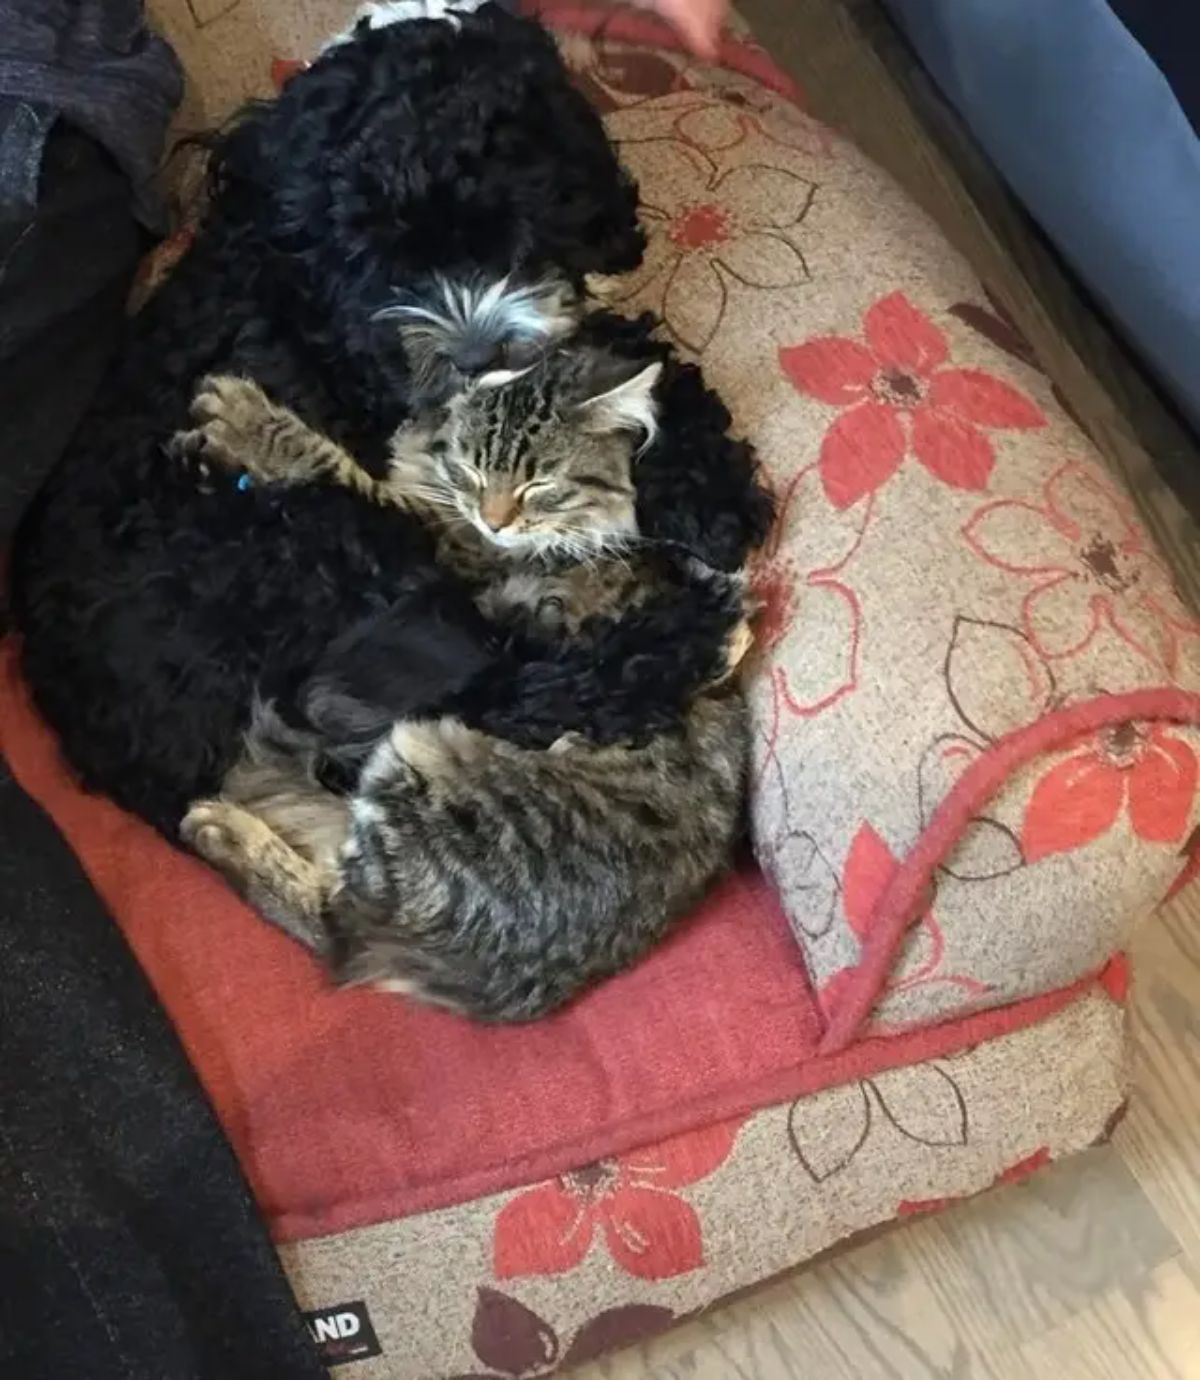 fluffy grey tabby cat and fluffy black dog cuddling together on a red and grey dog bed